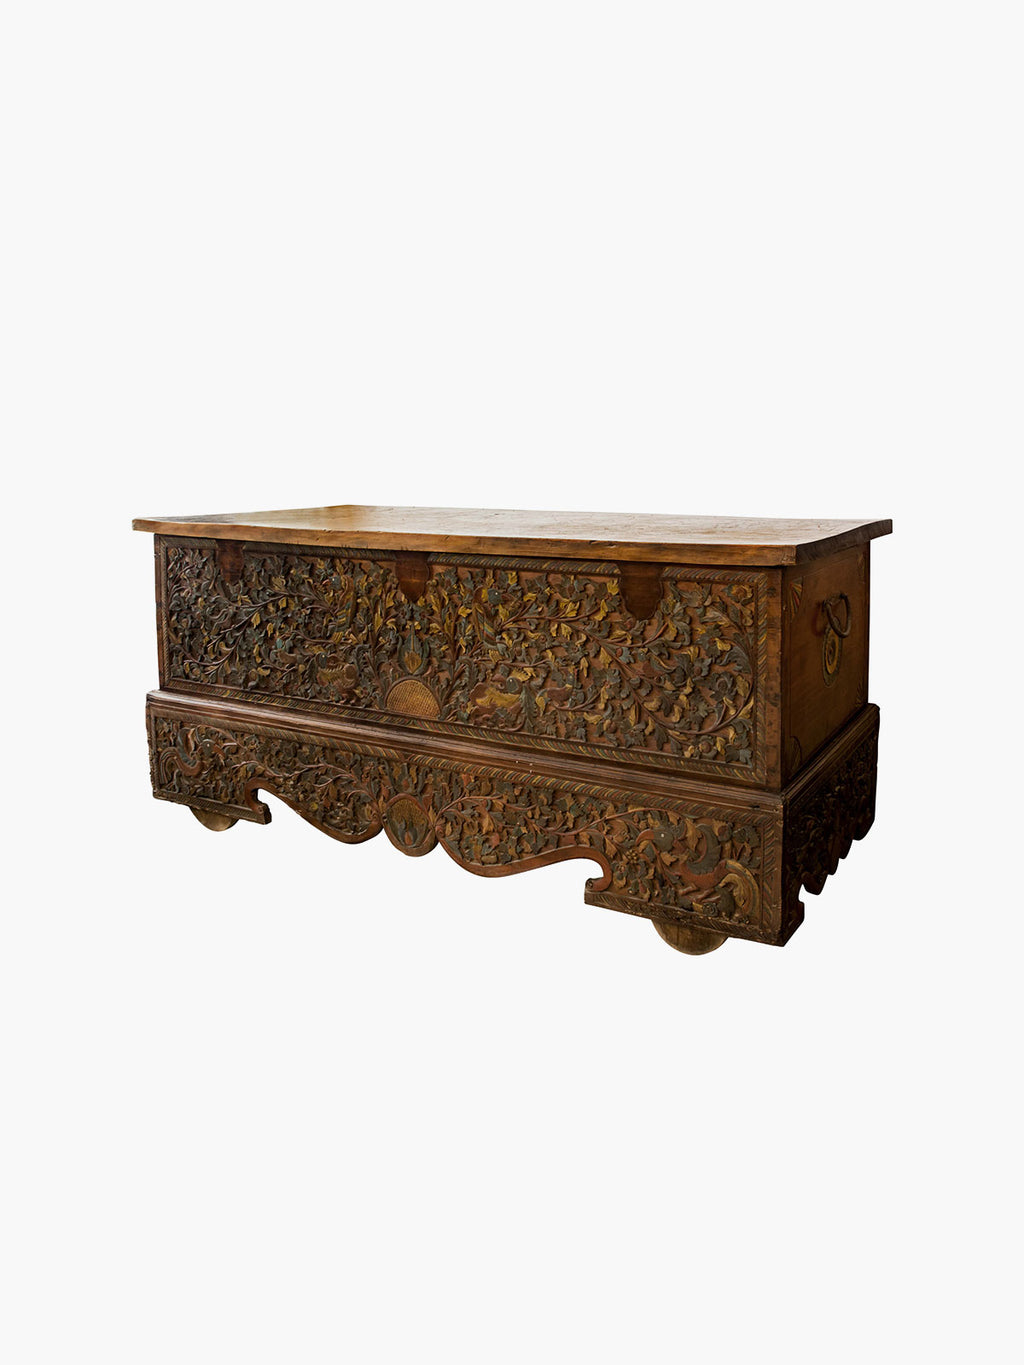 Indonesian Antique Trunk With Floral Design